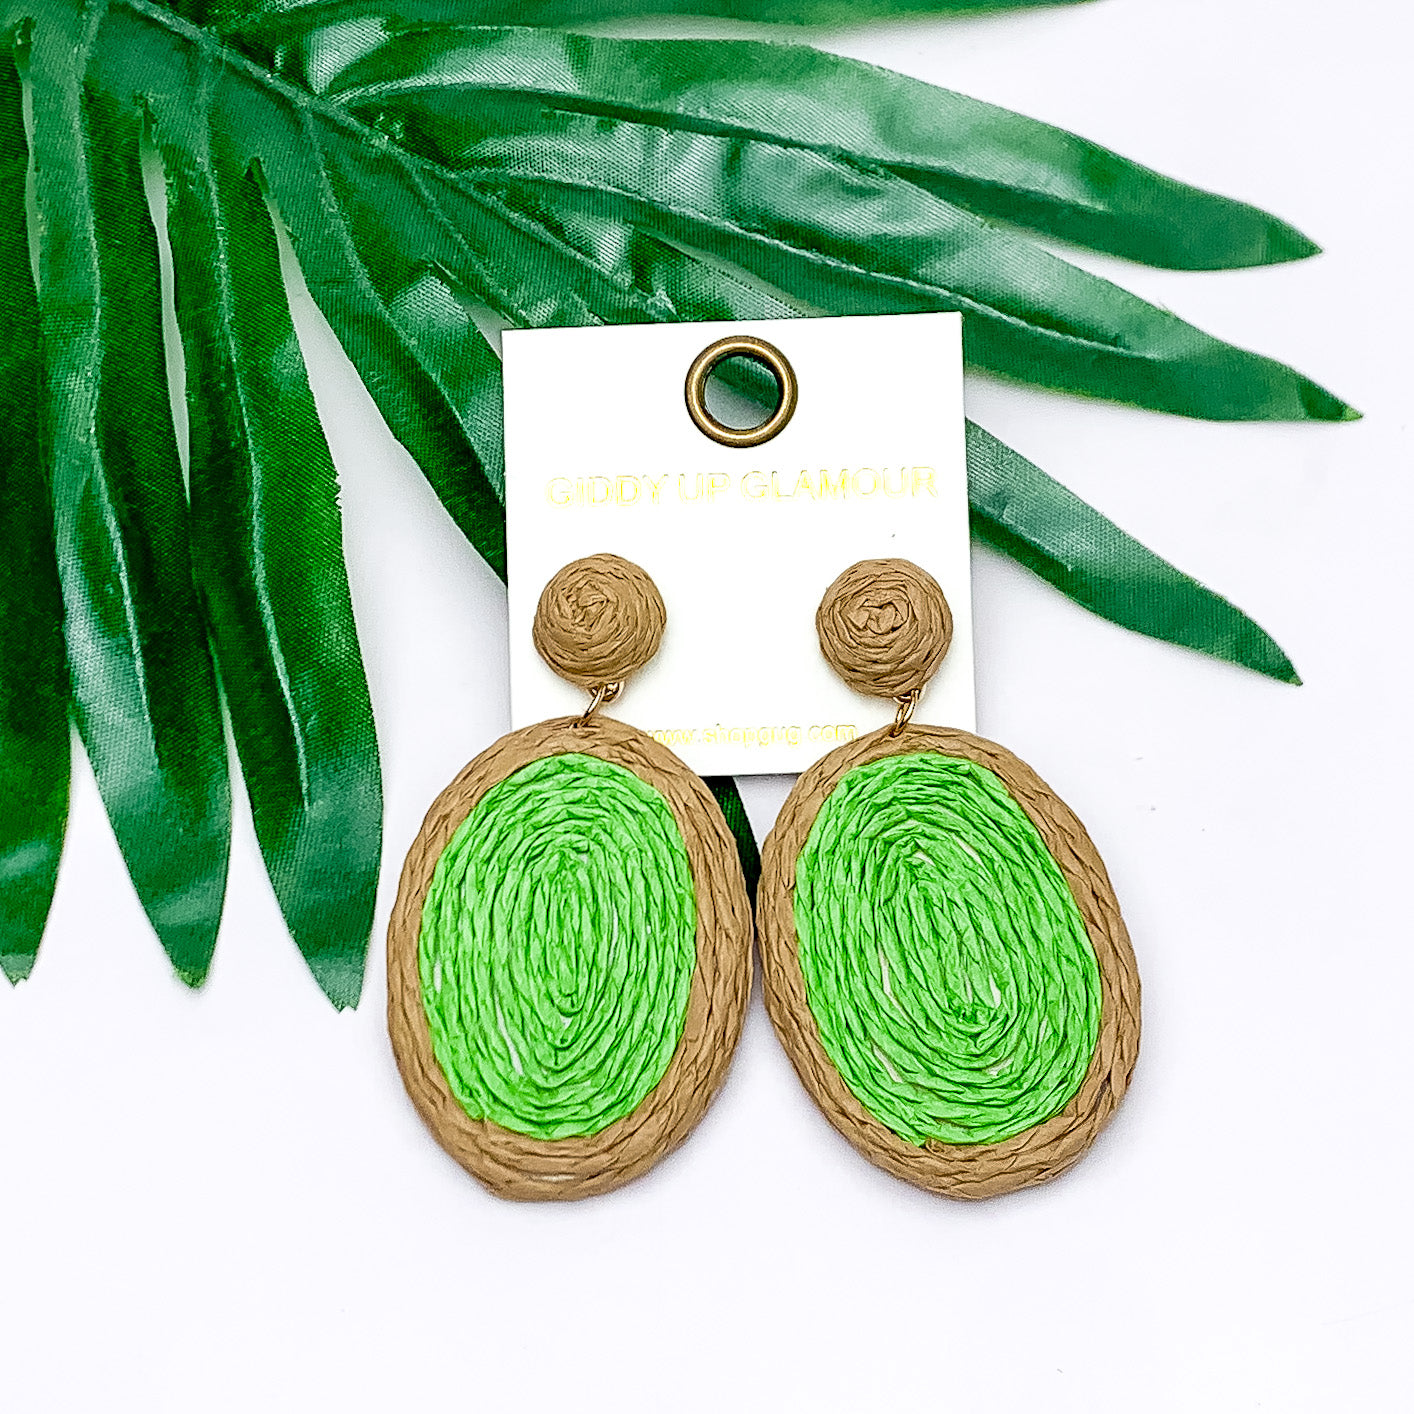 Brunch Bash Raffia Wrapped Oval Earrings in Light Green. Pictured on a white background with the earrings on a leaf.